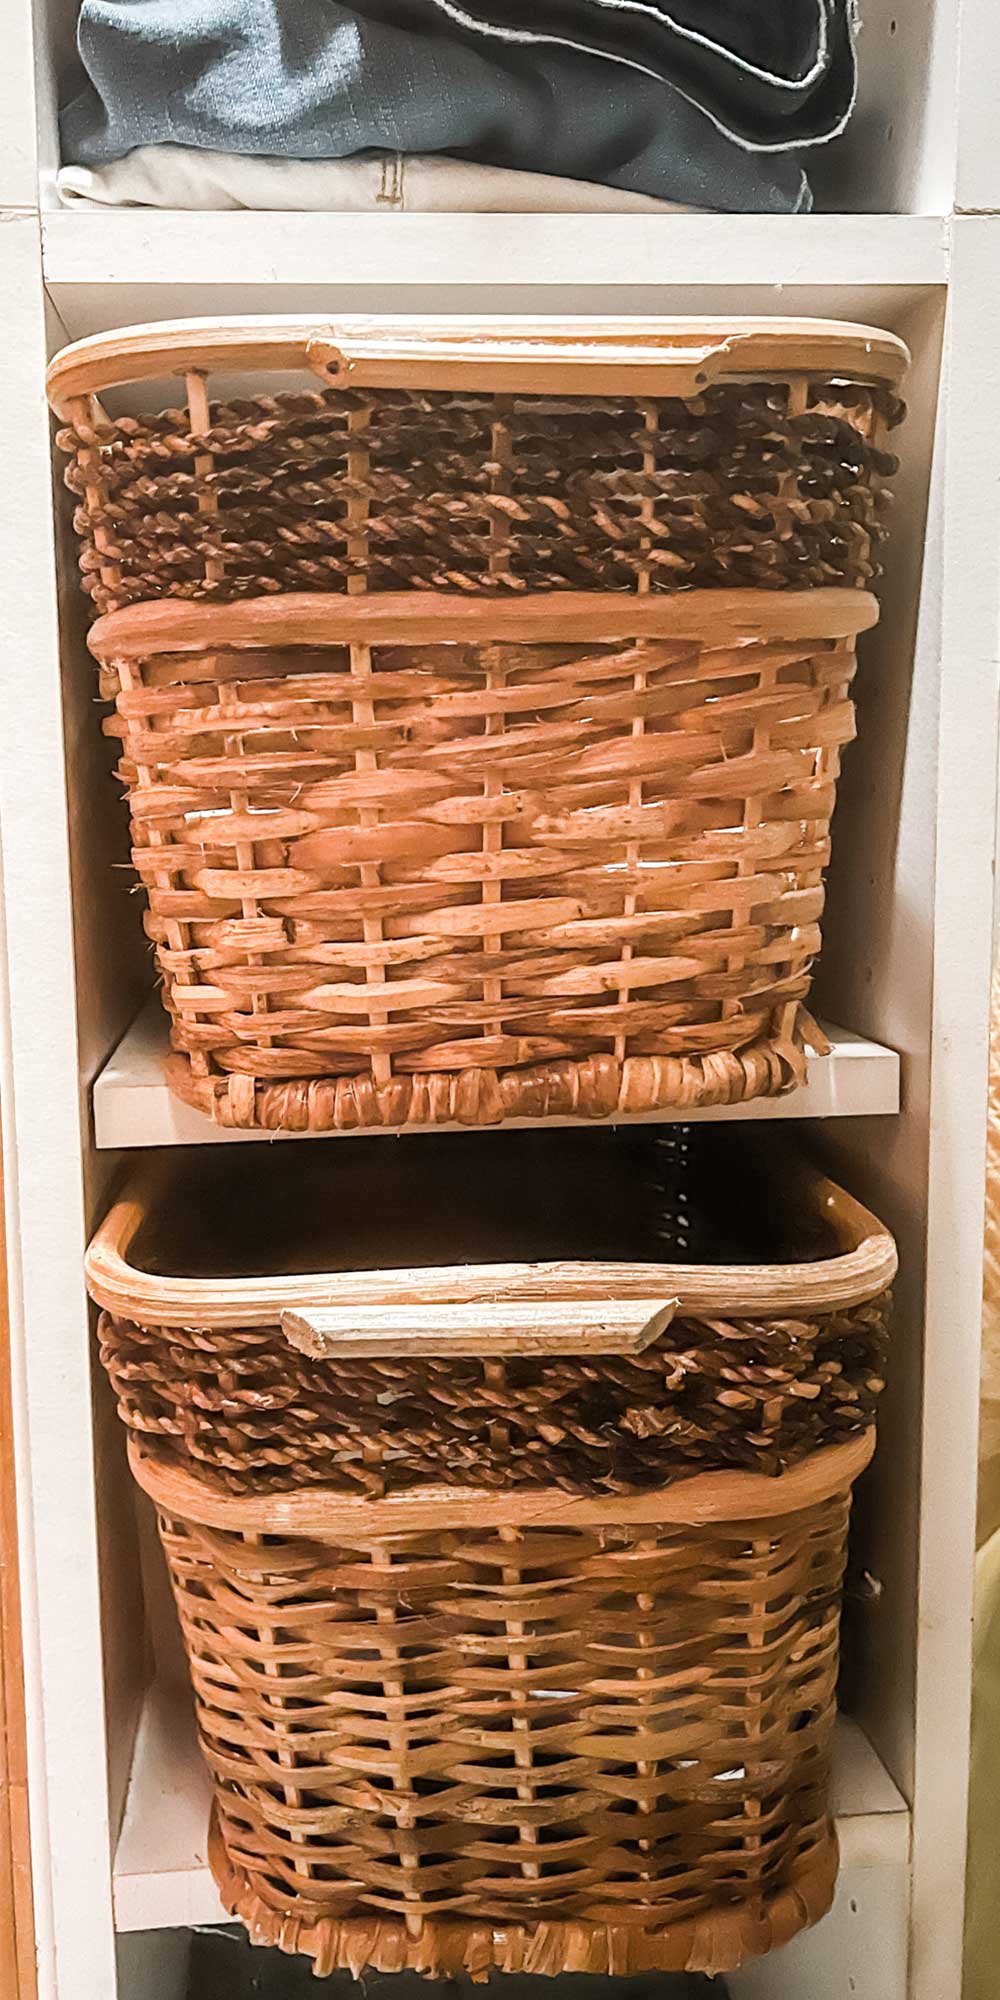 Closet organization created with stackable shelves and wicker baskets.